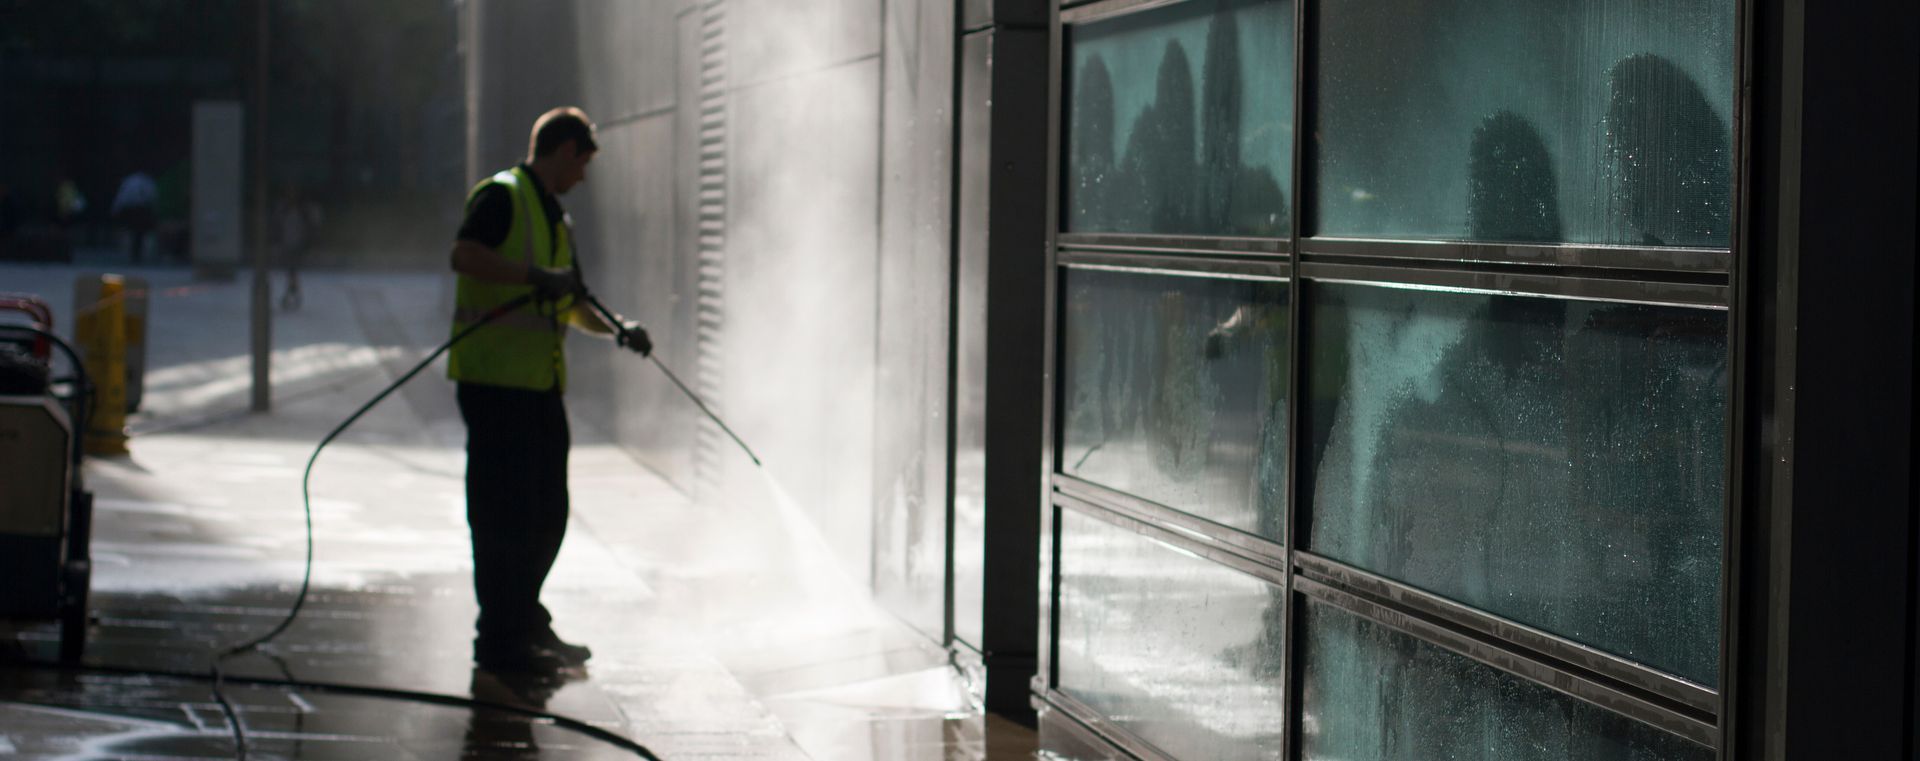 Commercial pressure washing service by Hedon Exterior Cleaning